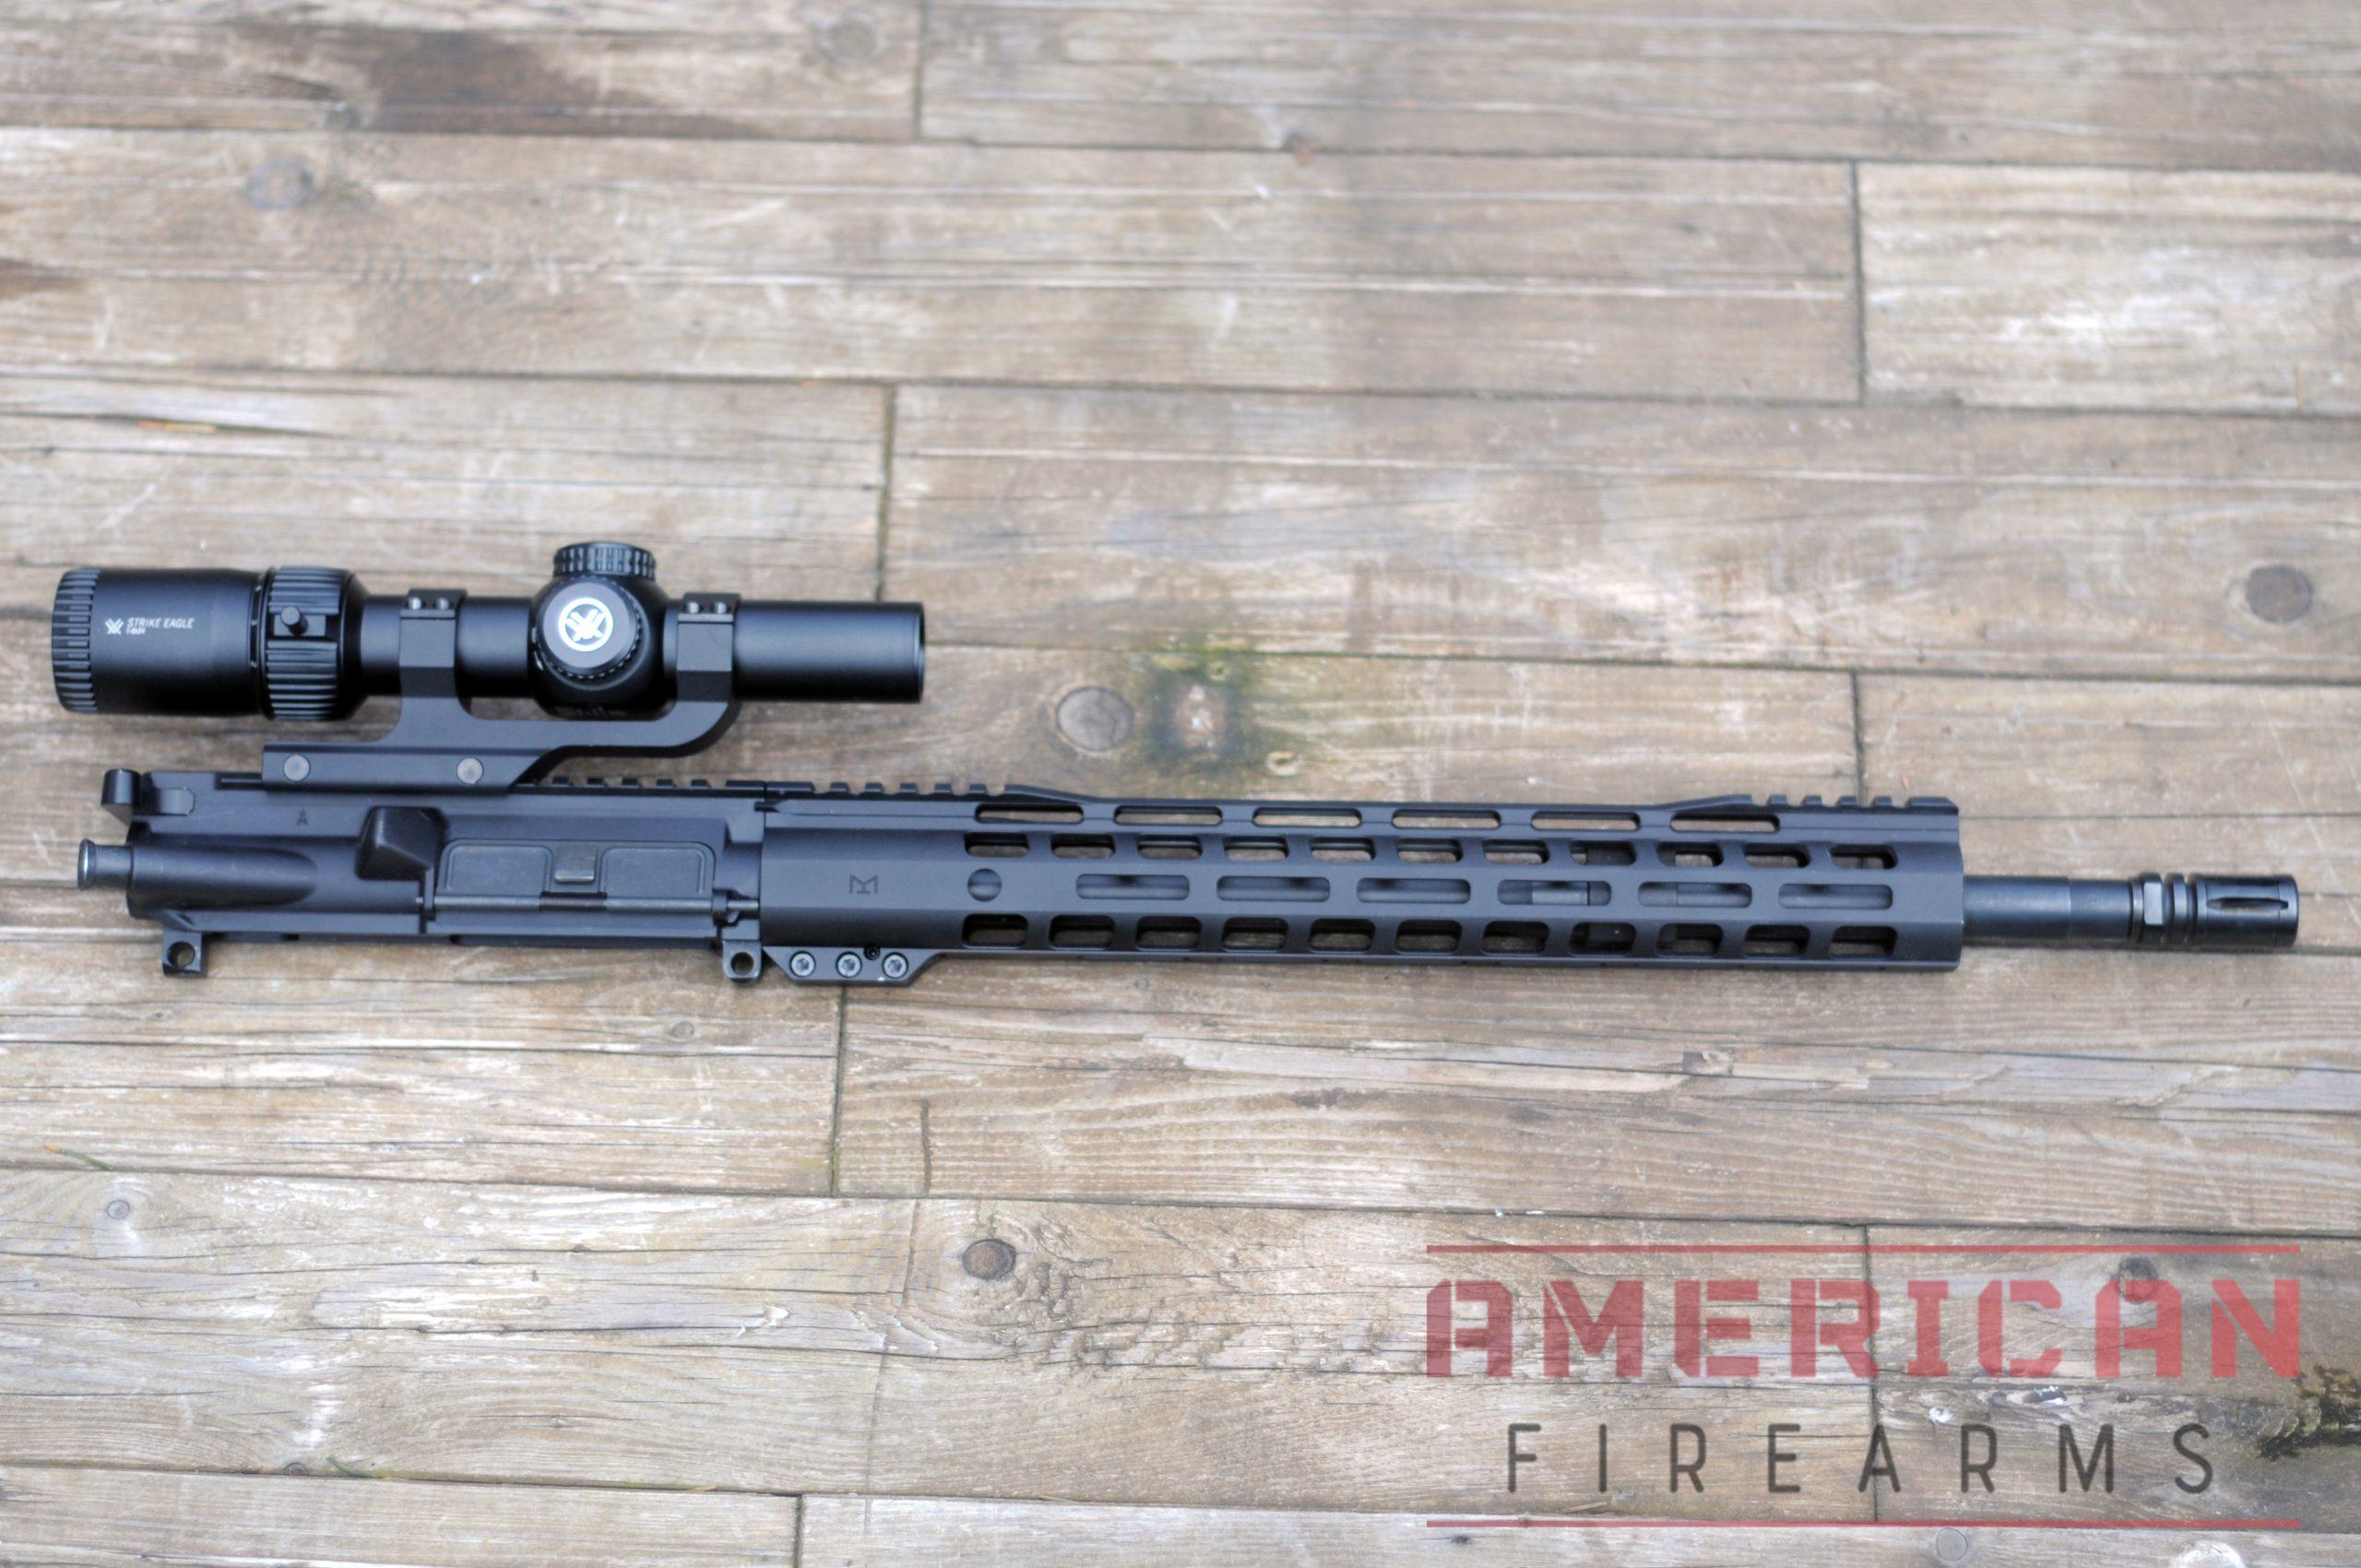 My PSA rifle uses my favorite gas system length -- an adjustable, low-profile mid-length gas system and I love the lightweight handguard.